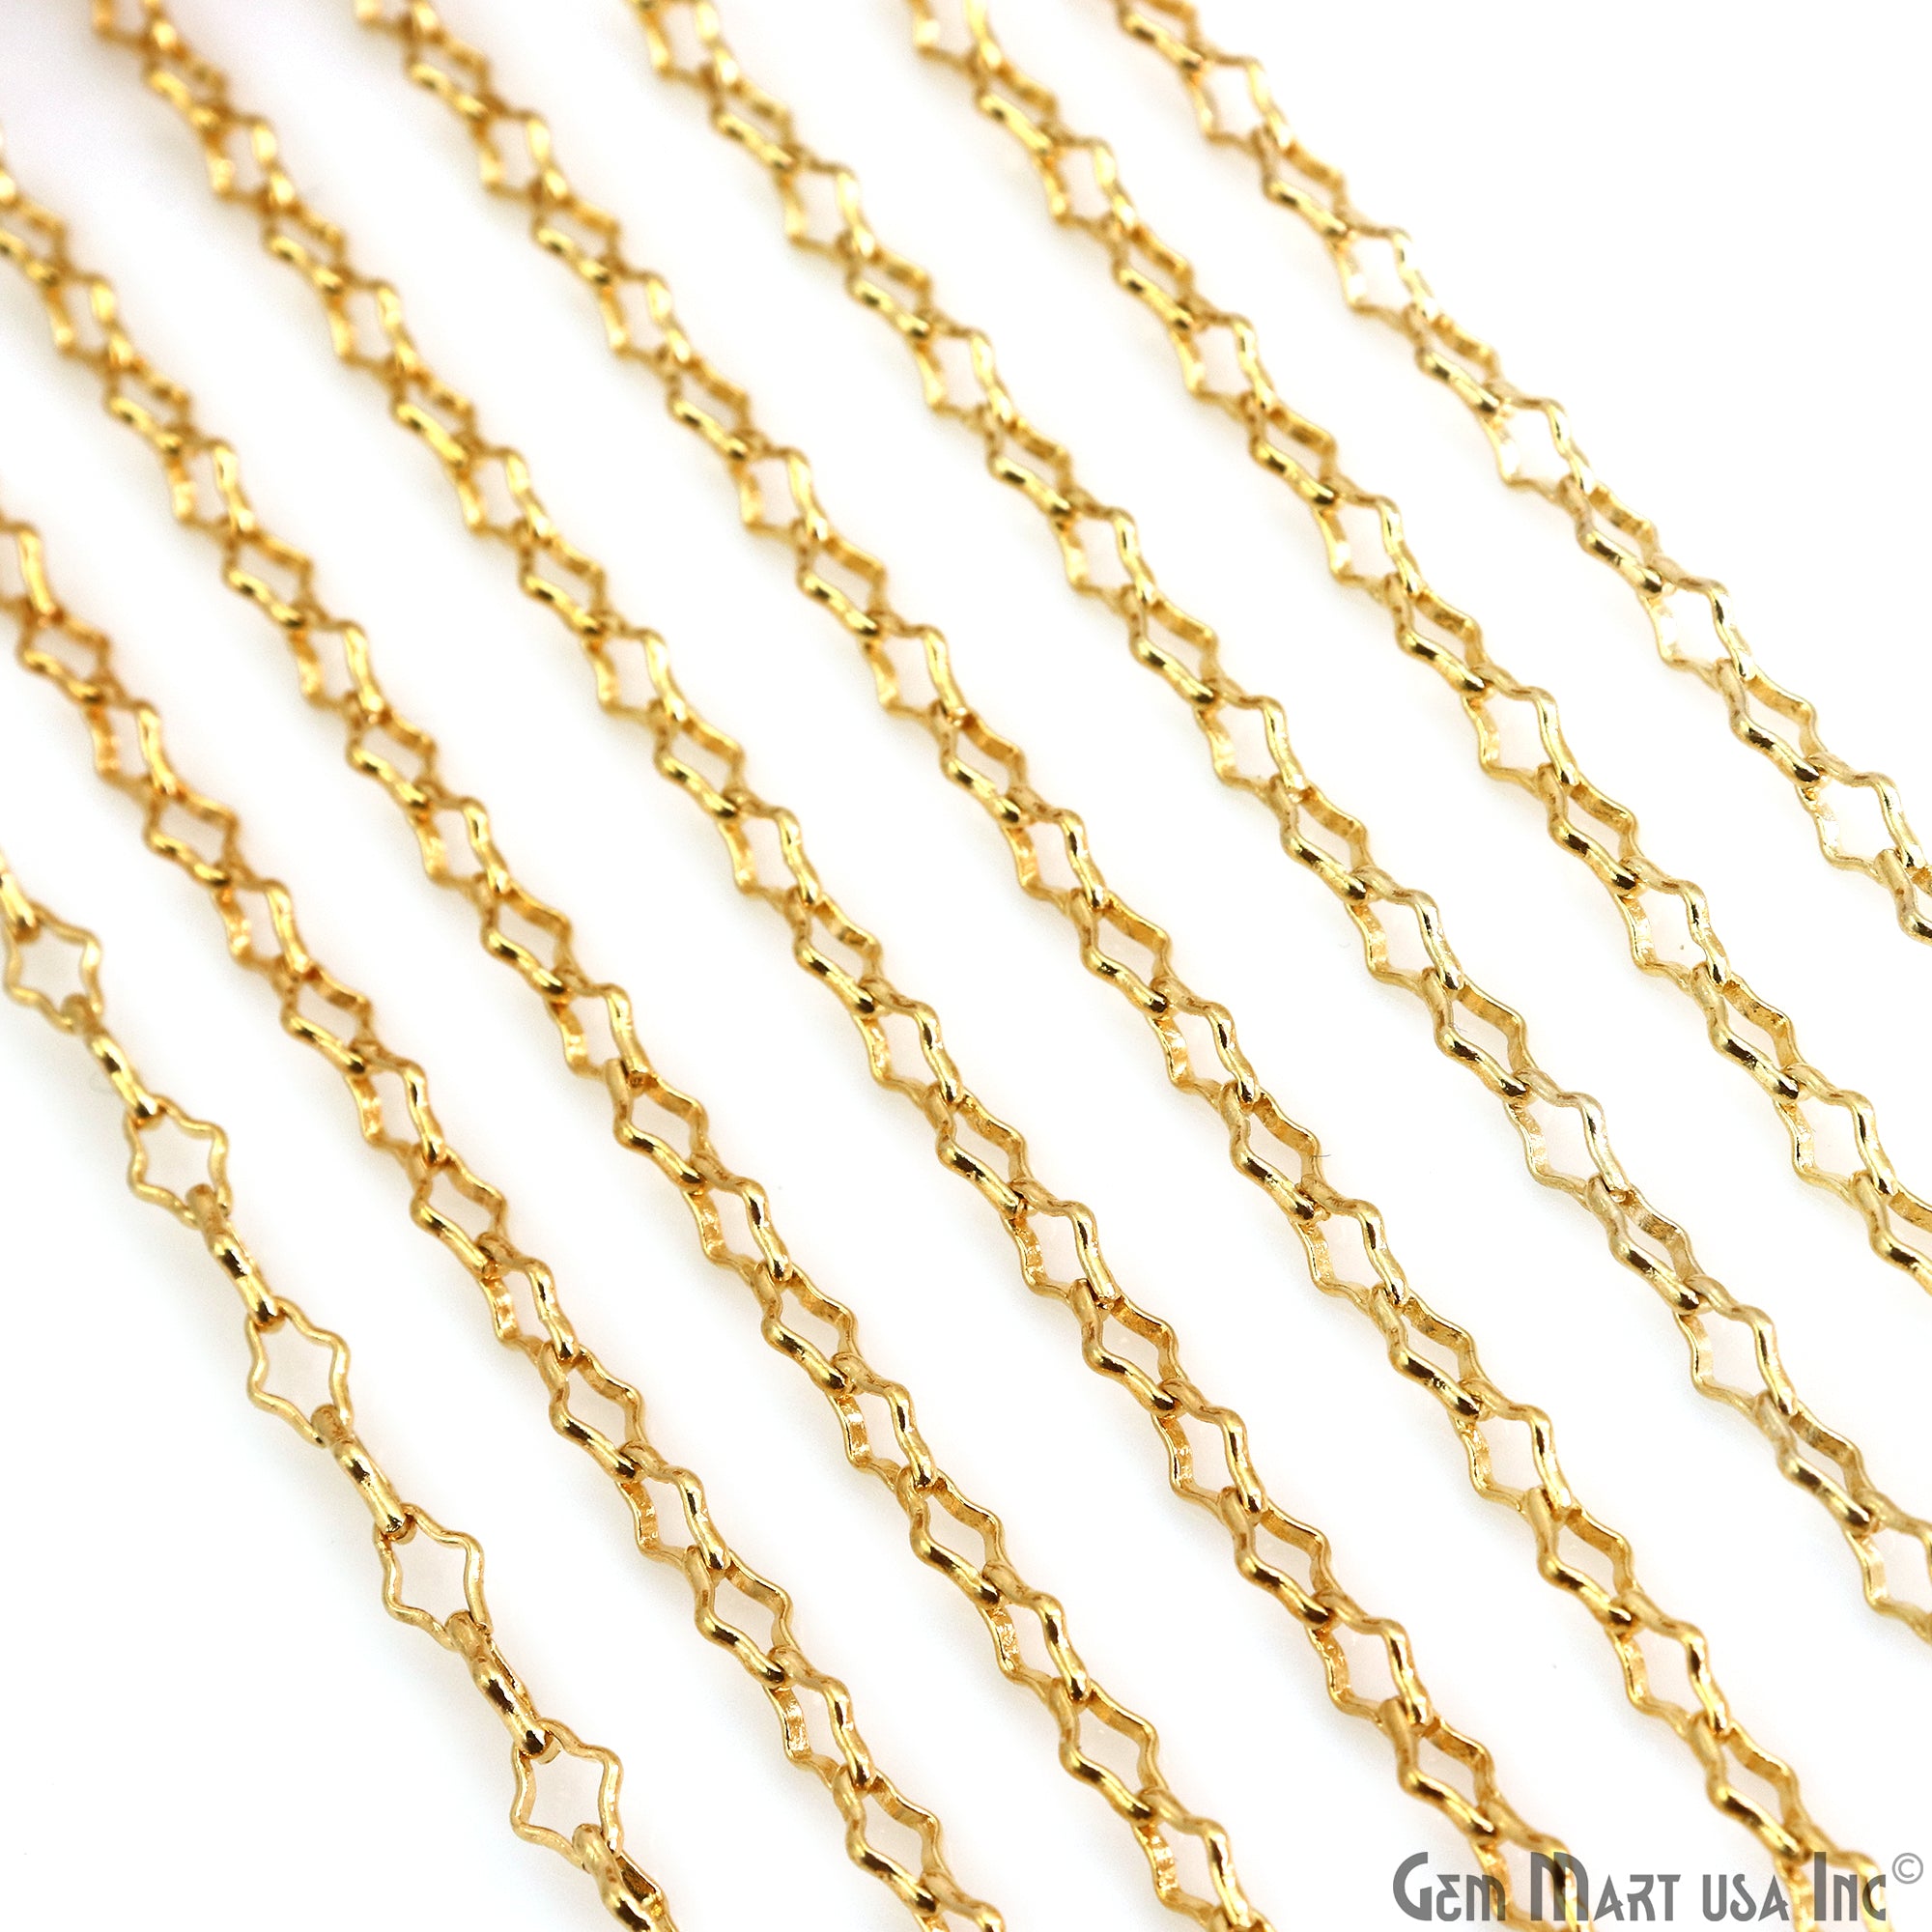 Clover Shape Finding Chain 6x4mm Gold Plated Station Rosary Chain